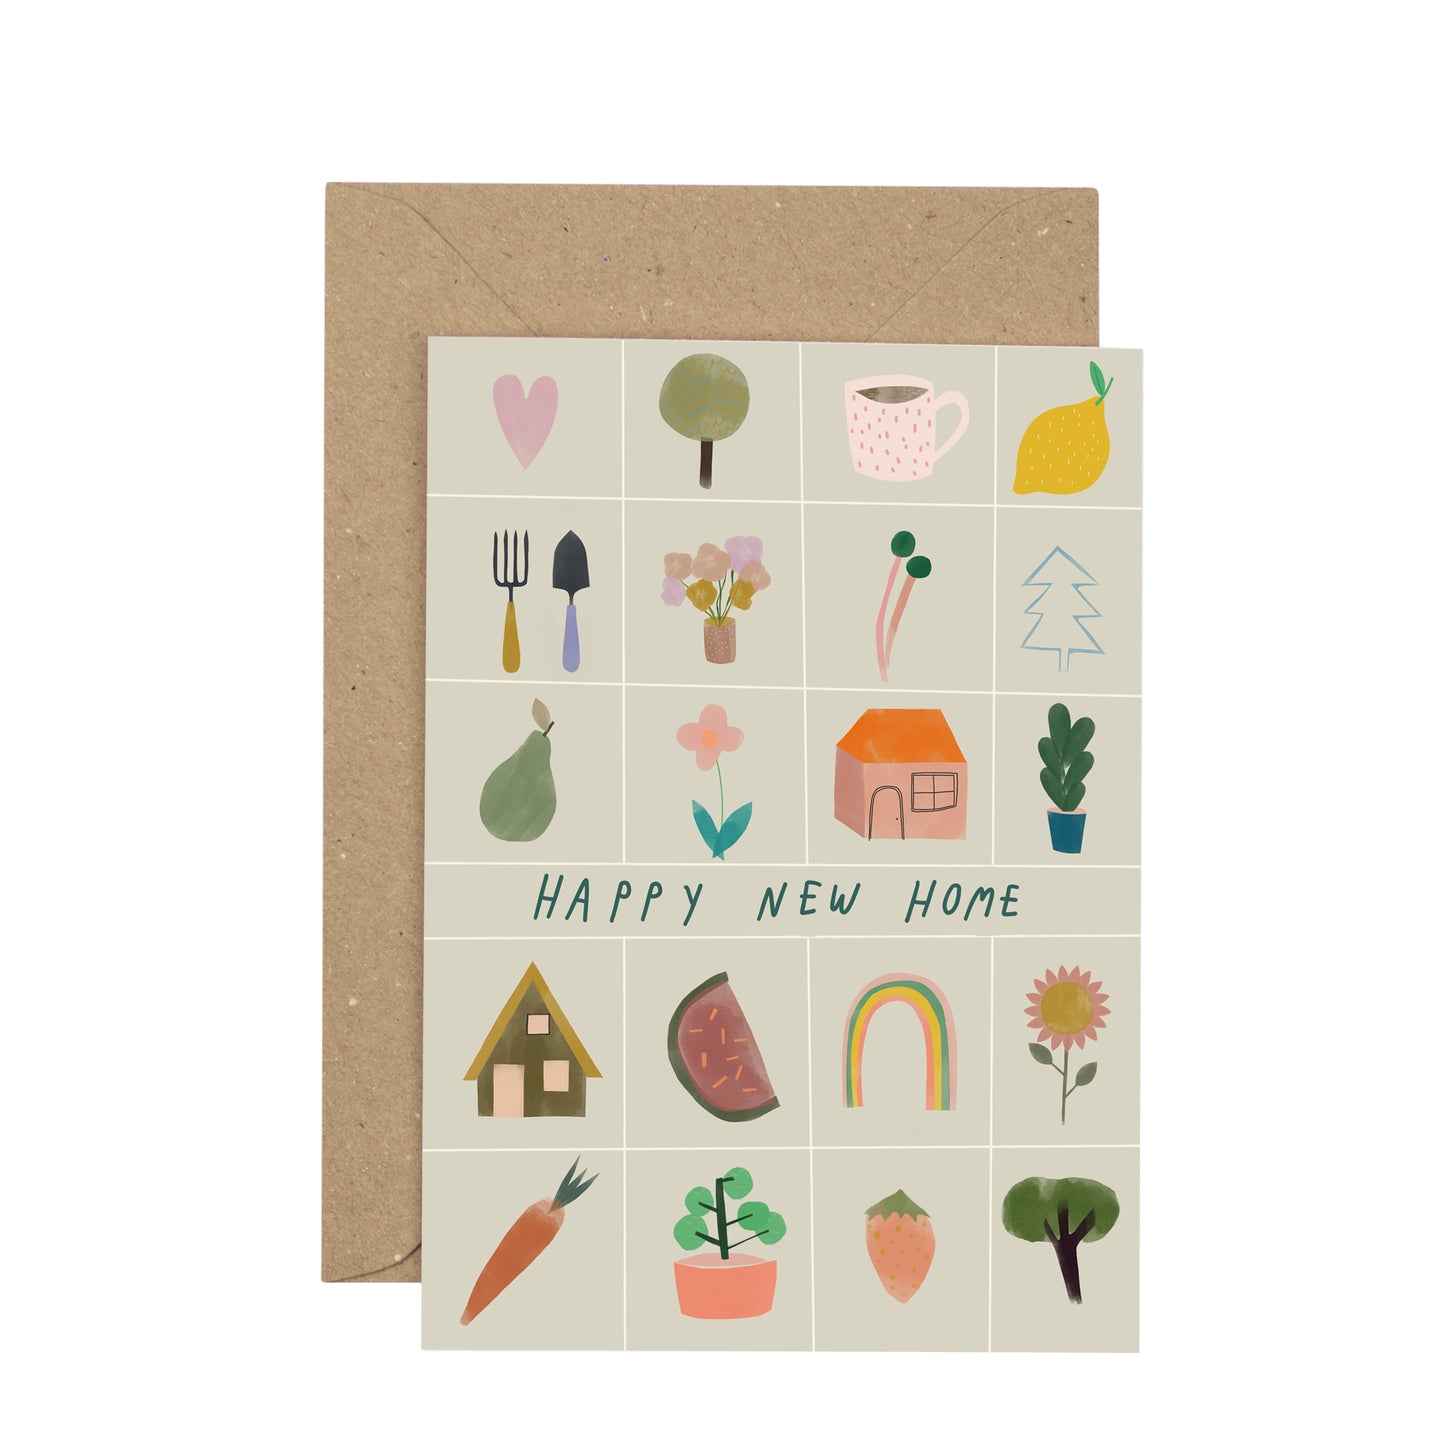 'Happy New Home' card